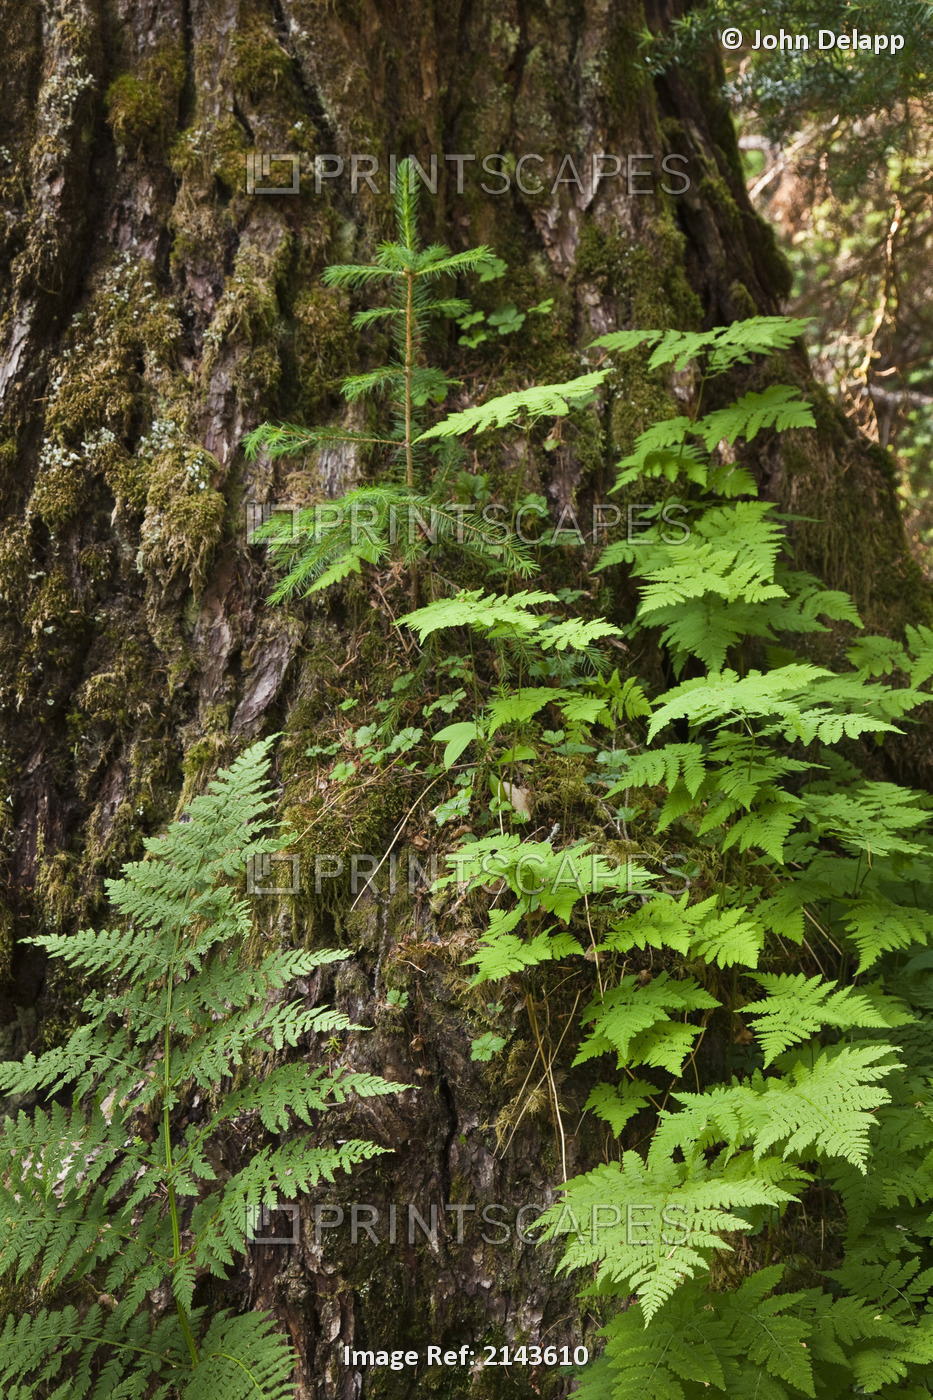 Wood Ferns And A Young Spruce Tree Grow Out Of The Base Of A Large Spruce Tree ...